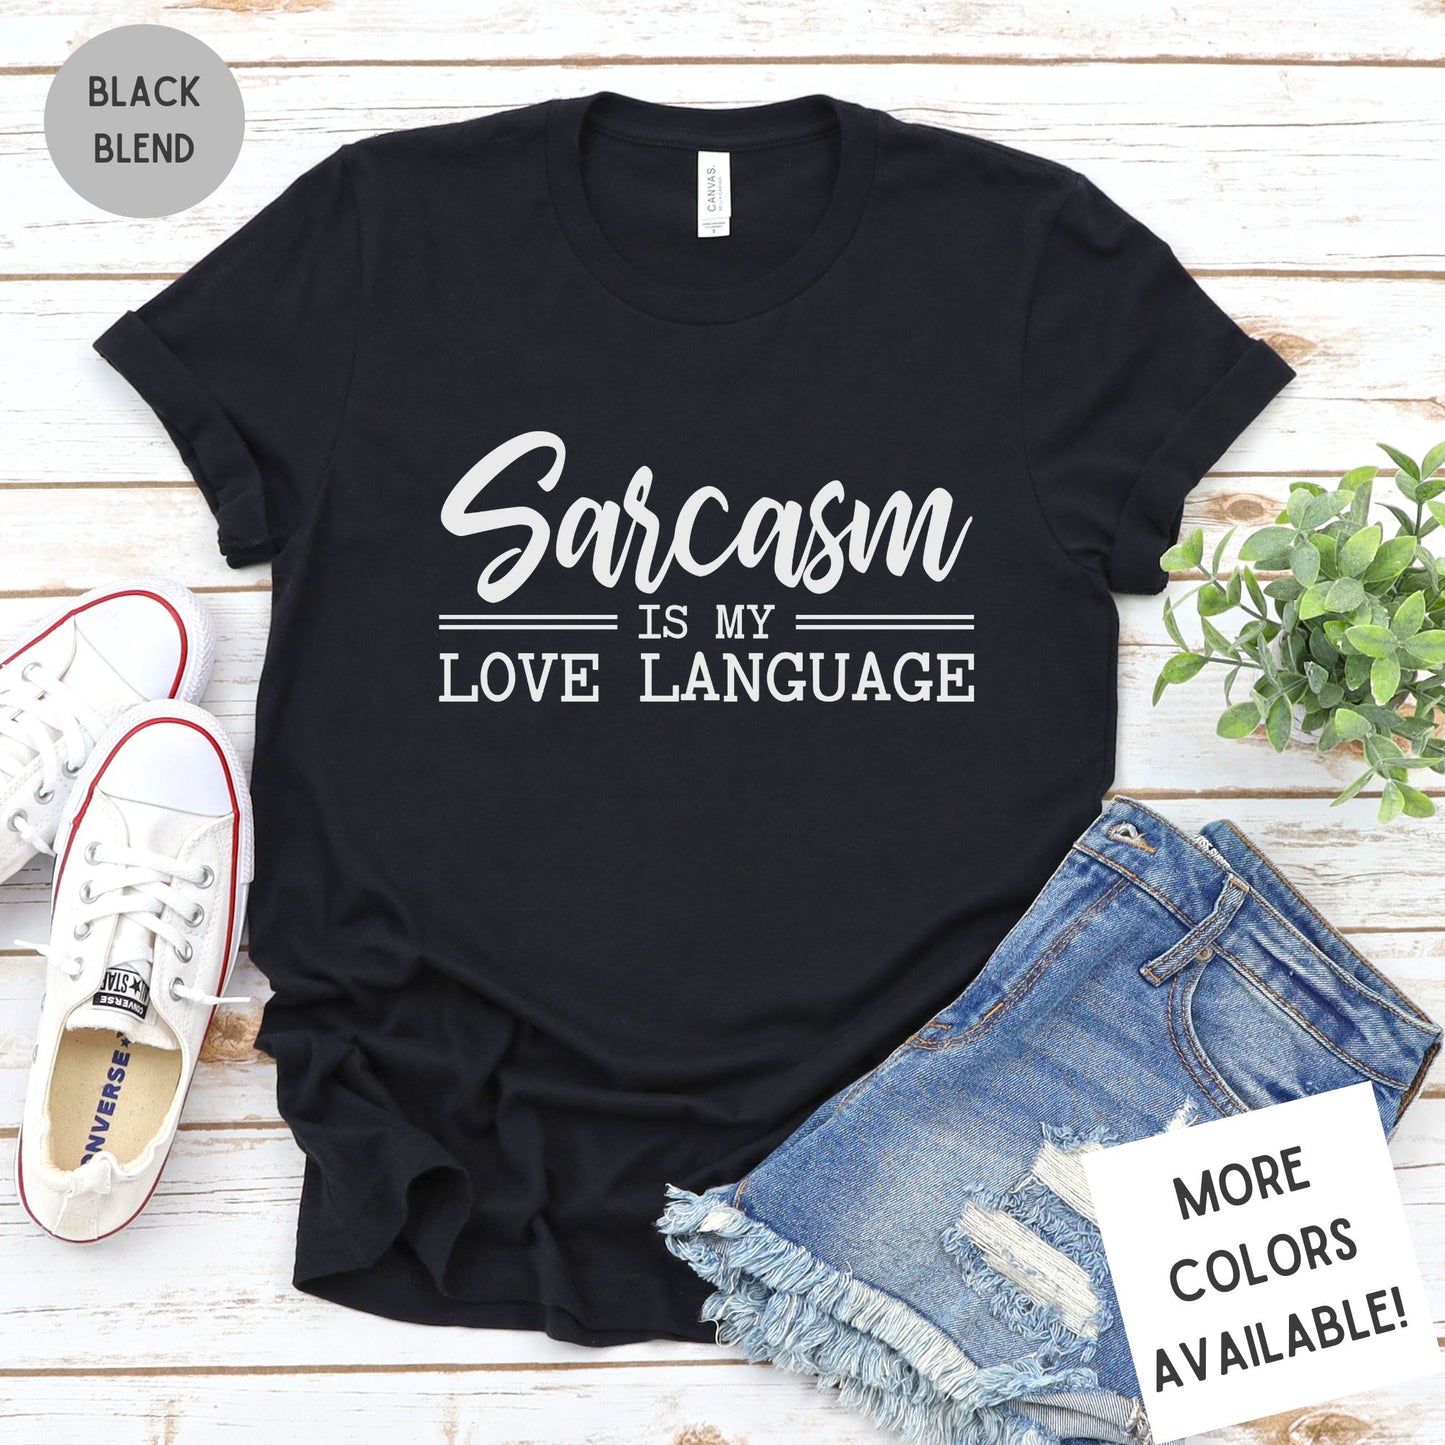 Sarcasm Is My Love Language Funny Graphic T-Shirt